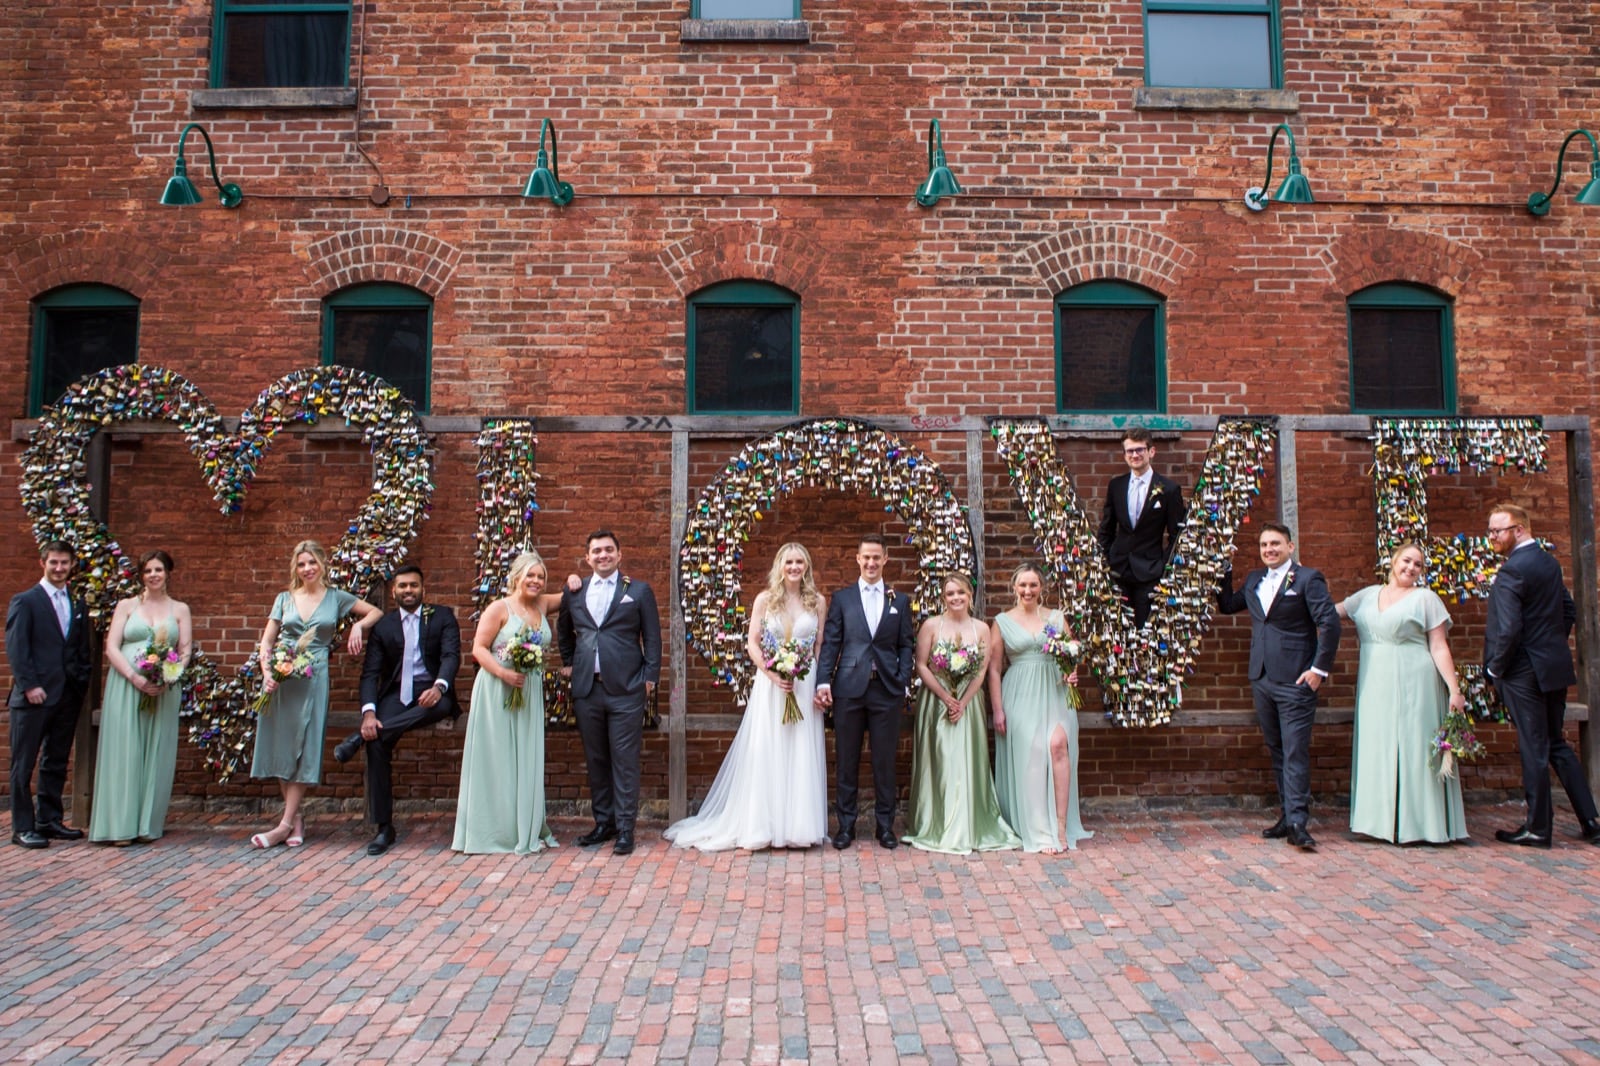 Ryan and Ainslee's Wedding at the Archeo Restaurant - Distillery District, Toronto